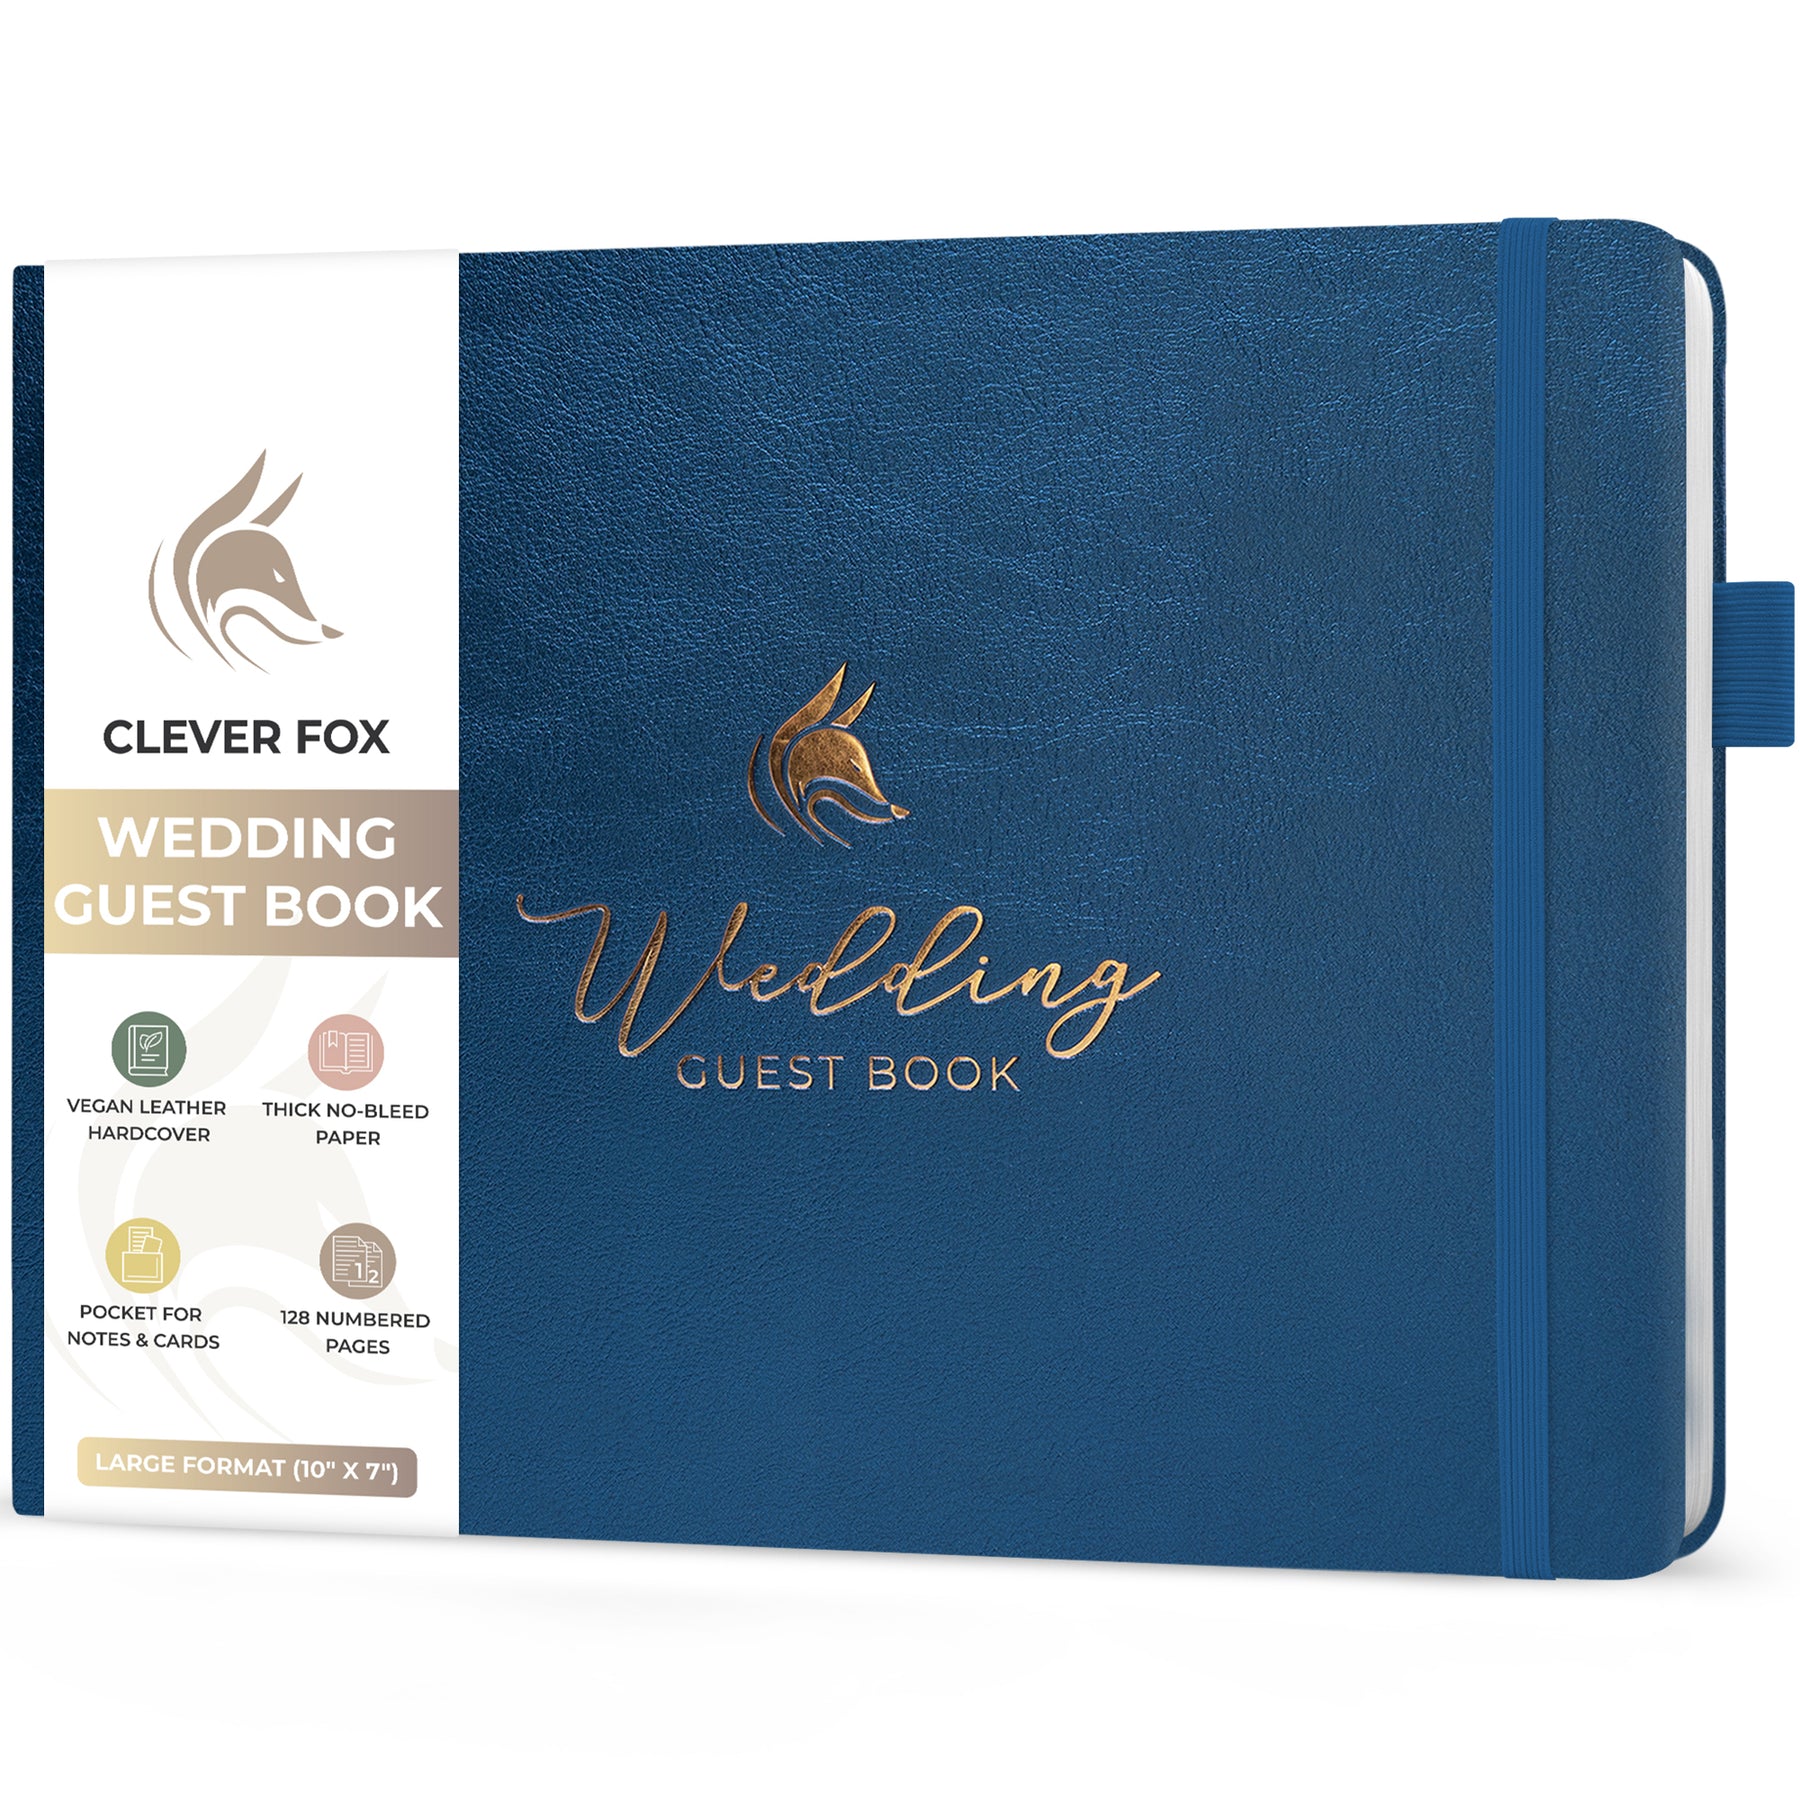 Clever Fox Wedding Planner – Clever Fox®